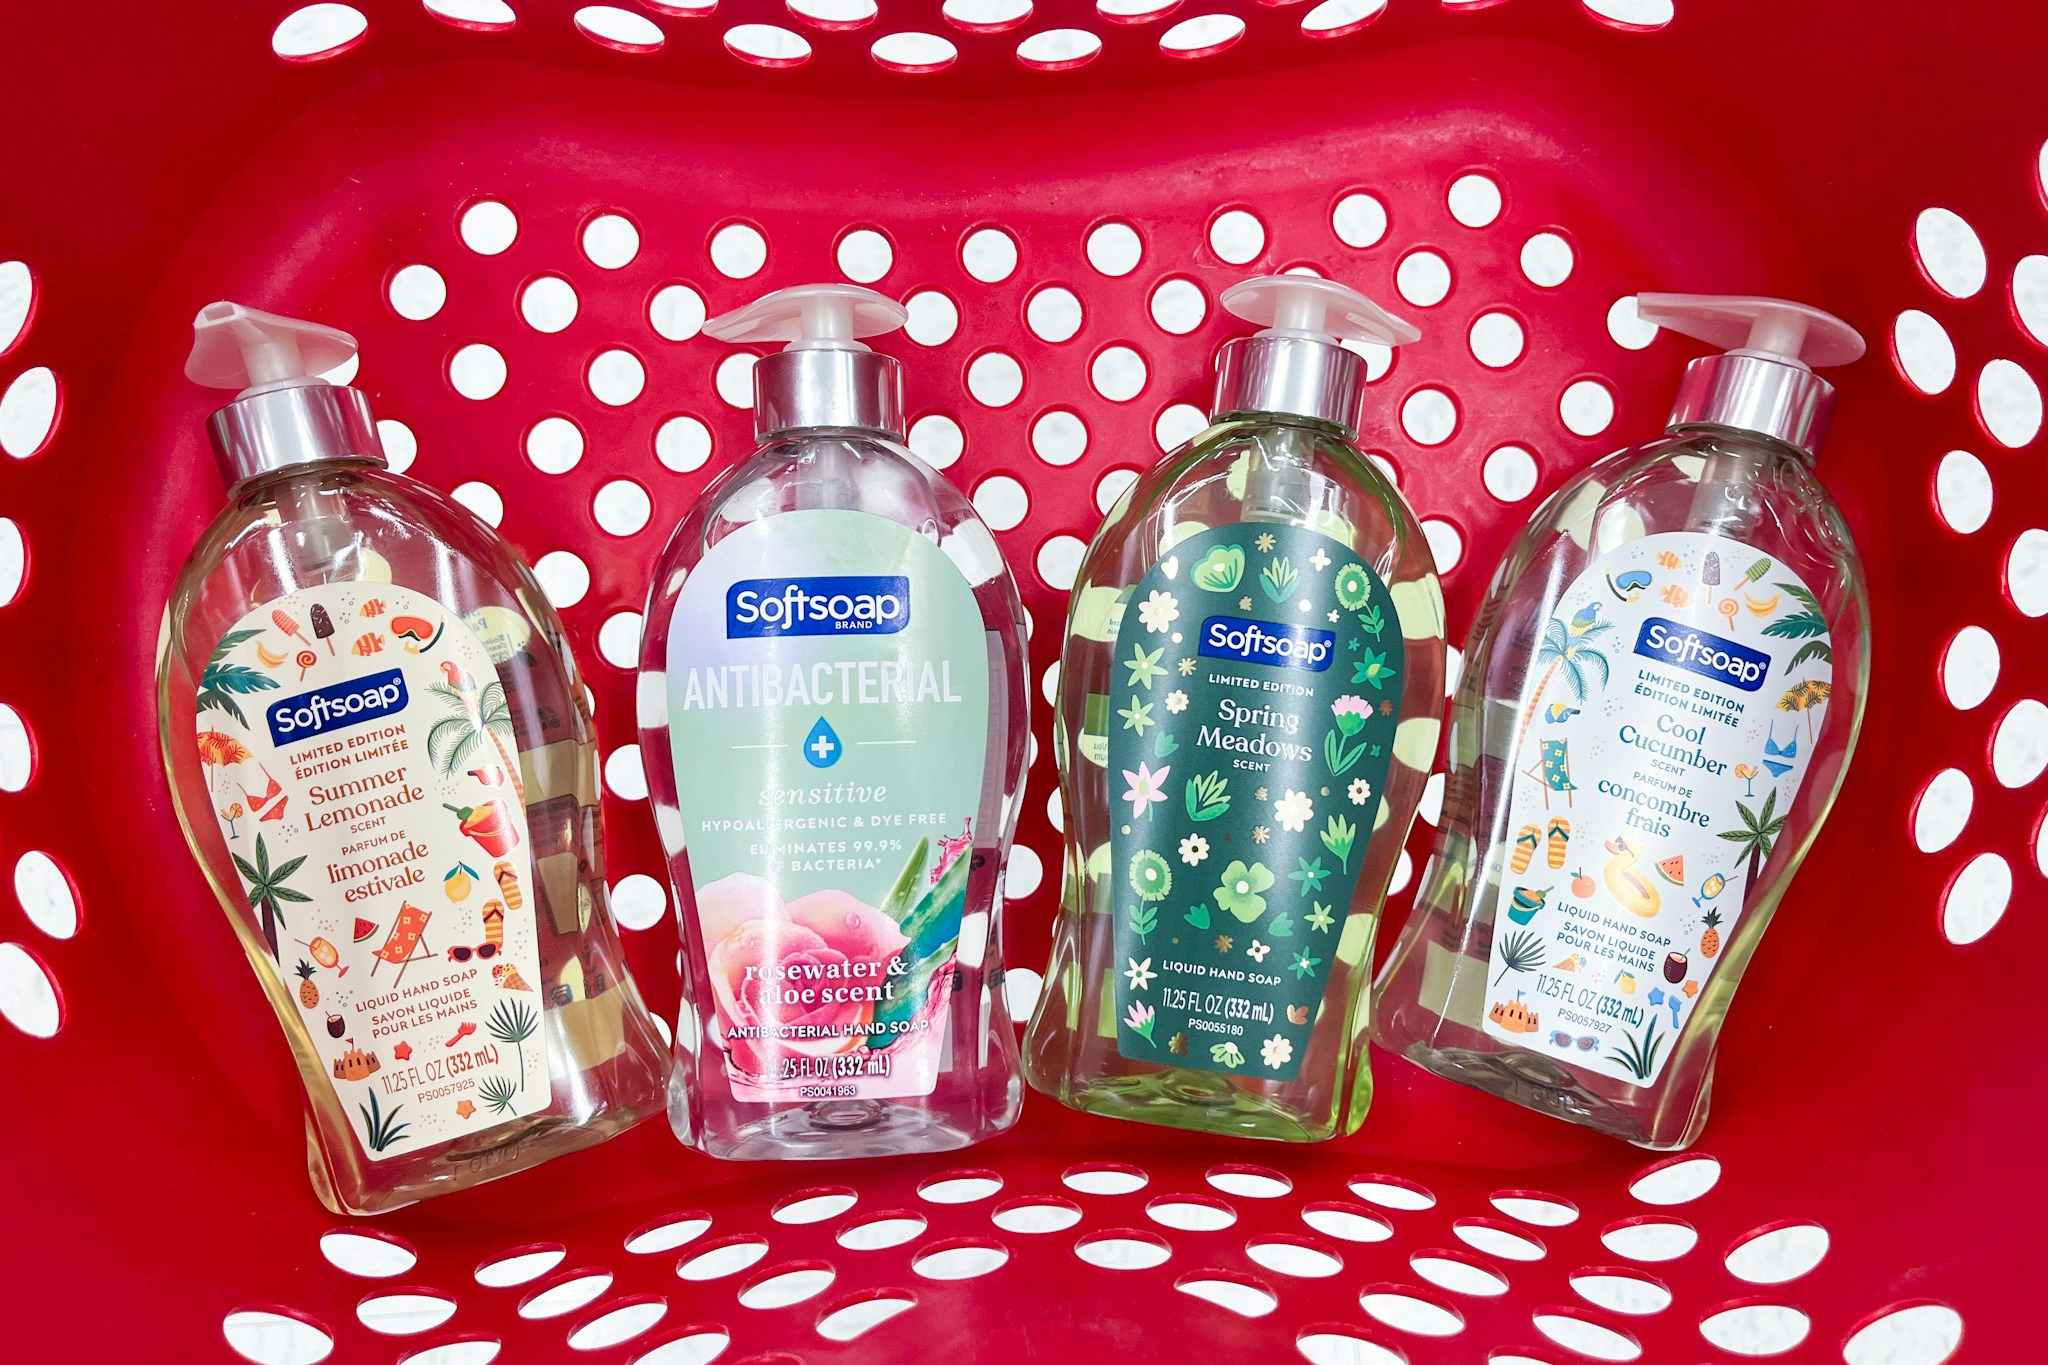 Softsoap Limited Edition Hand Soap, Only $0.43 at Target